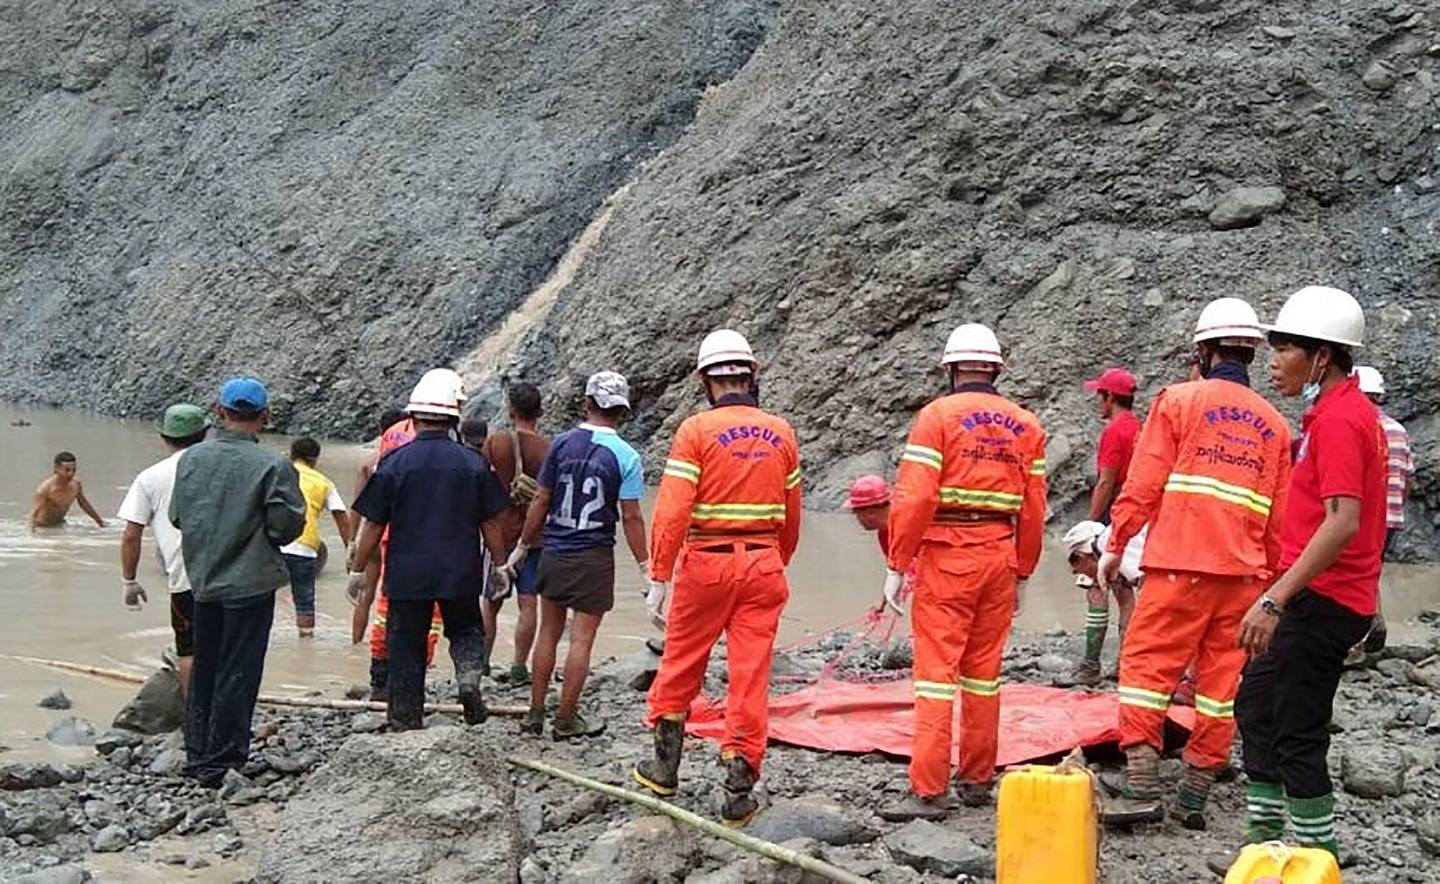 This handout from the Myanmar Fire Services Department taken and released on July 2, 2020 shows rescuers attempting to locate survivors after a landslide at a jade mine in Hpakant, Kachin state. - The bodies of at least 50 jade miners were pulled from the mud on July 2 after a landslide in northern Myanmar, fire services said, as monsoon rains worsen already deadly conditions. (Photo by Handout / MYANMAR FIRE SERVICES DEPARTMENT / AFP) / -----EDITORS NOTE --- RESTRICTED TO EDITORIAL USE - MANDATORY CREDIT "AFP PHOTO / MYANMAR FIRE SERVICES DEPARTMENT " - NO MARKETING - NO ADVERTISING CAMPAIGNS - DISTRIBUTED AS A SERVICE TO CLIENTS